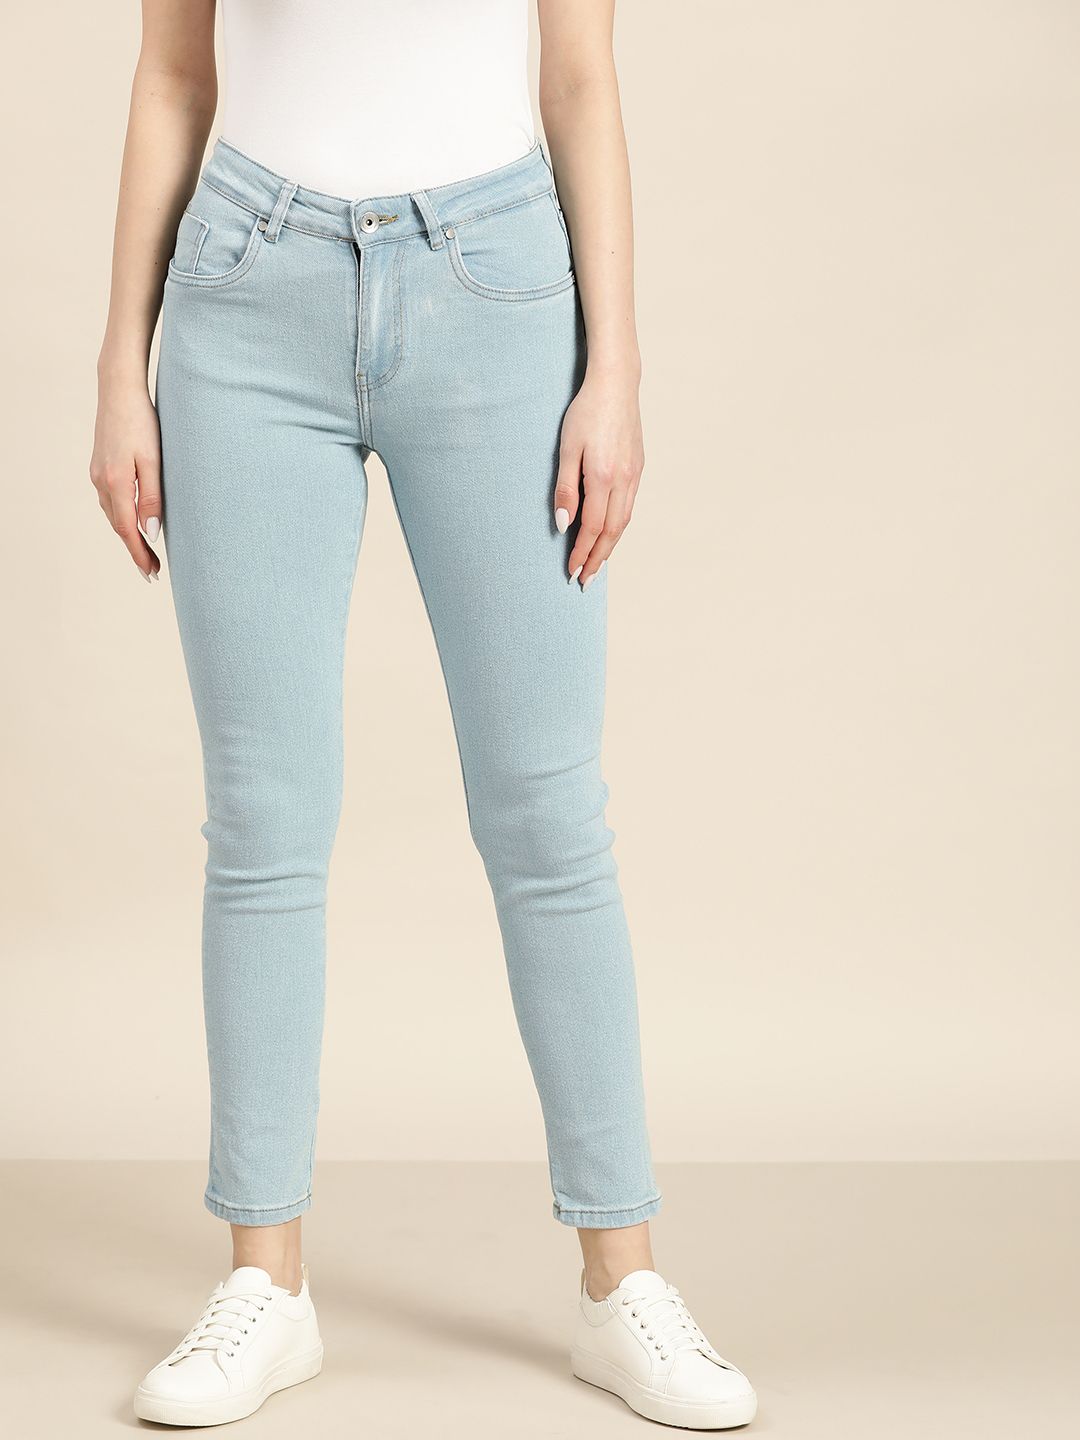 ether Women Blue Slim Fit Stretchable Jeans Price in India